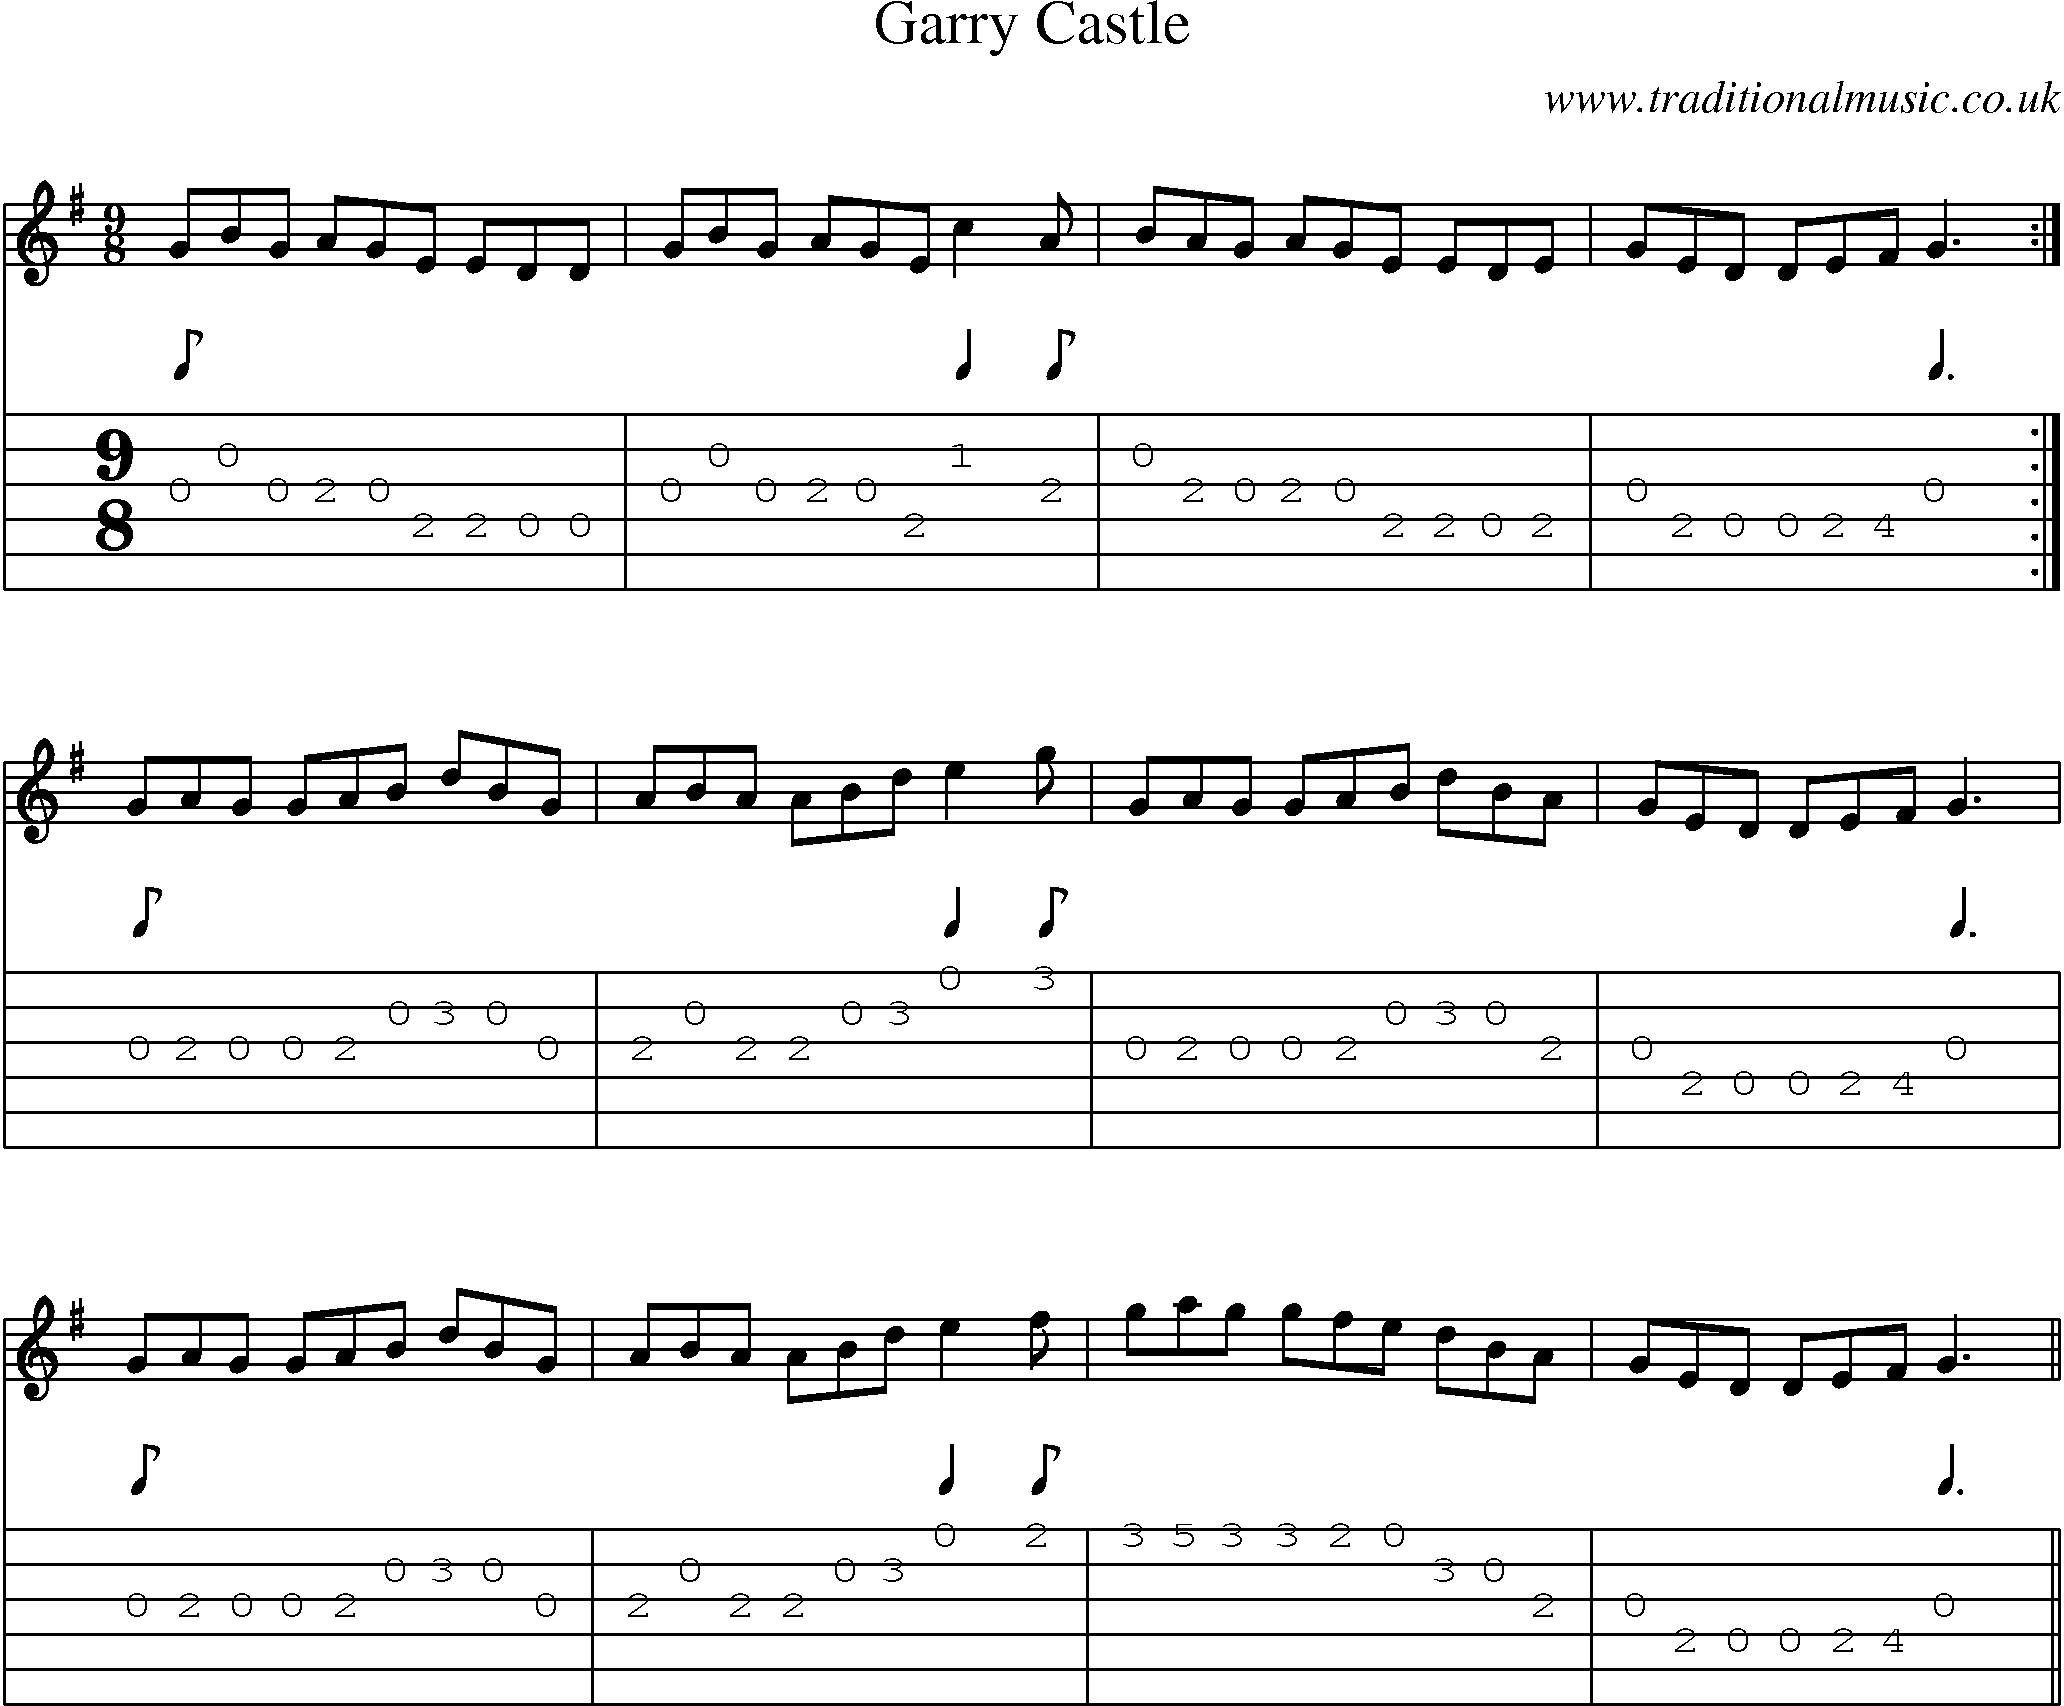 Music Score and Guitar Tabs for Garry Castle